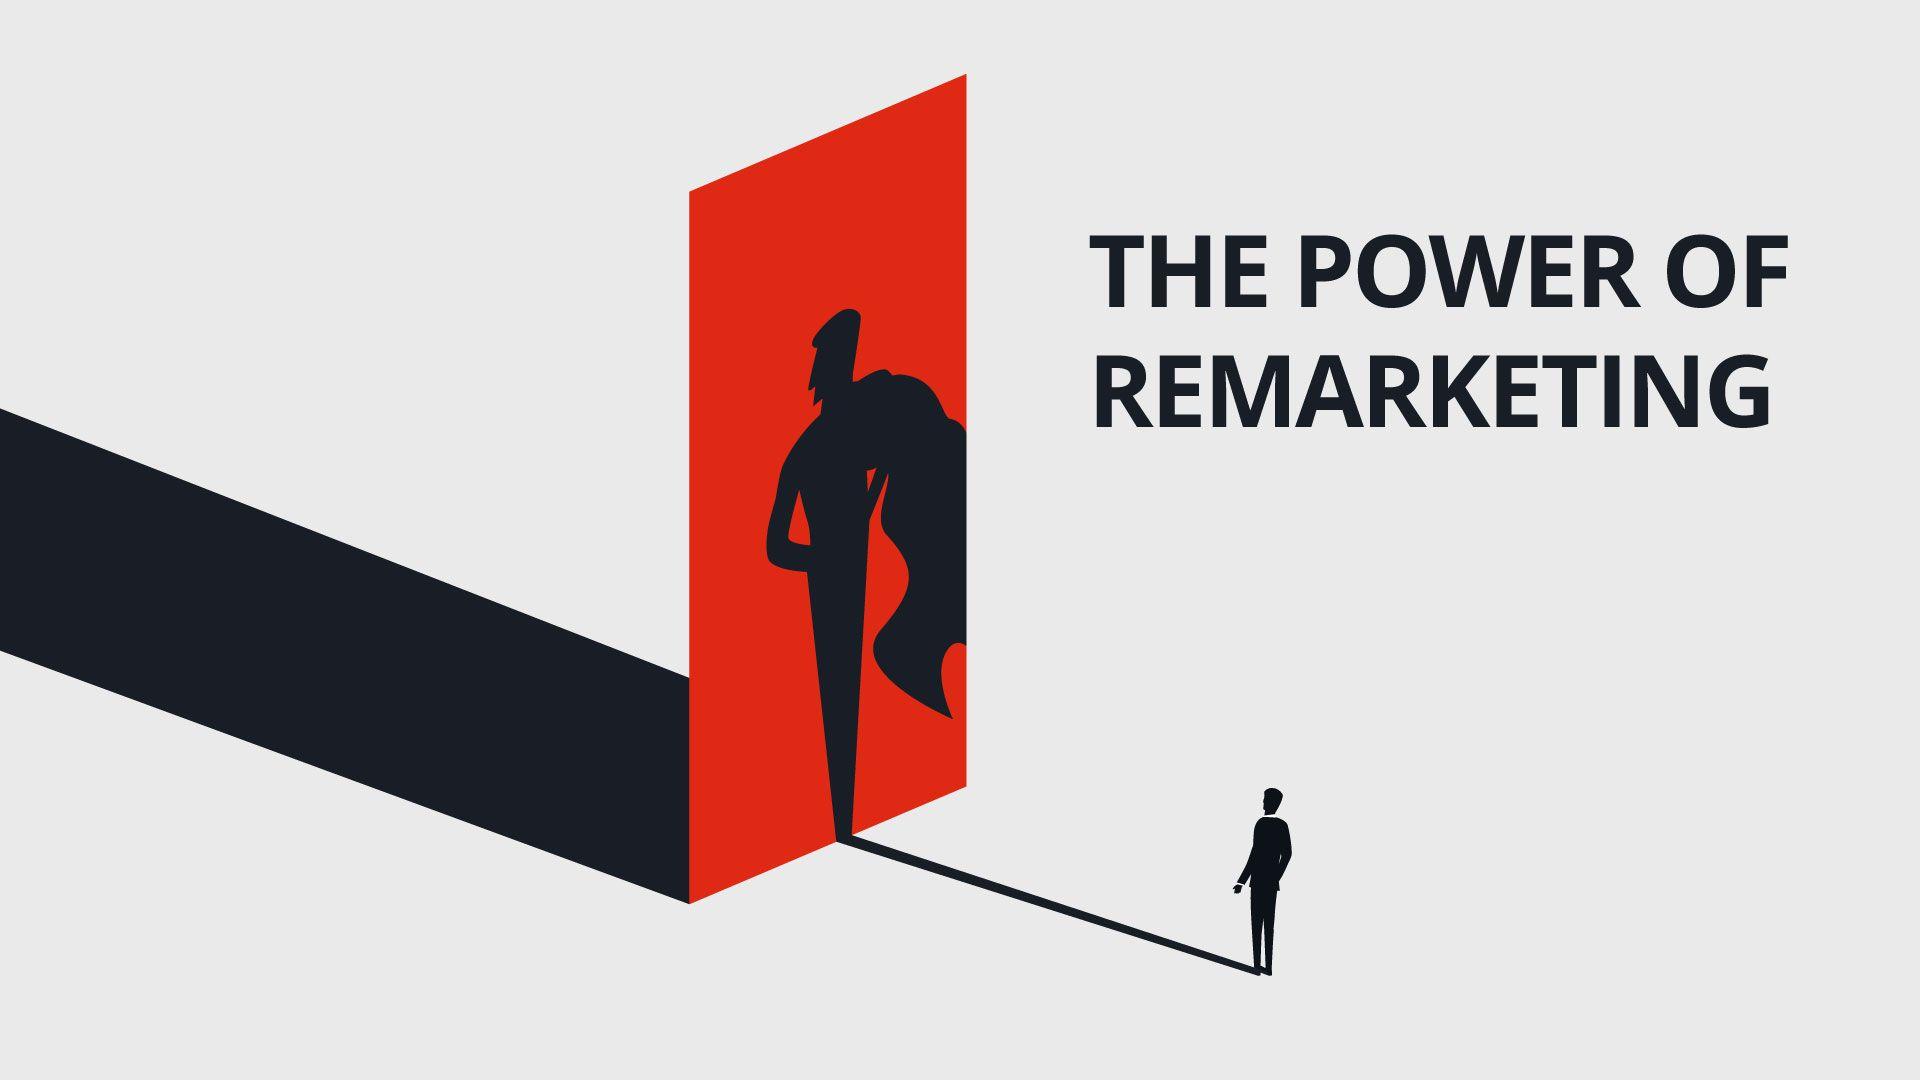 The Power of Remarketing